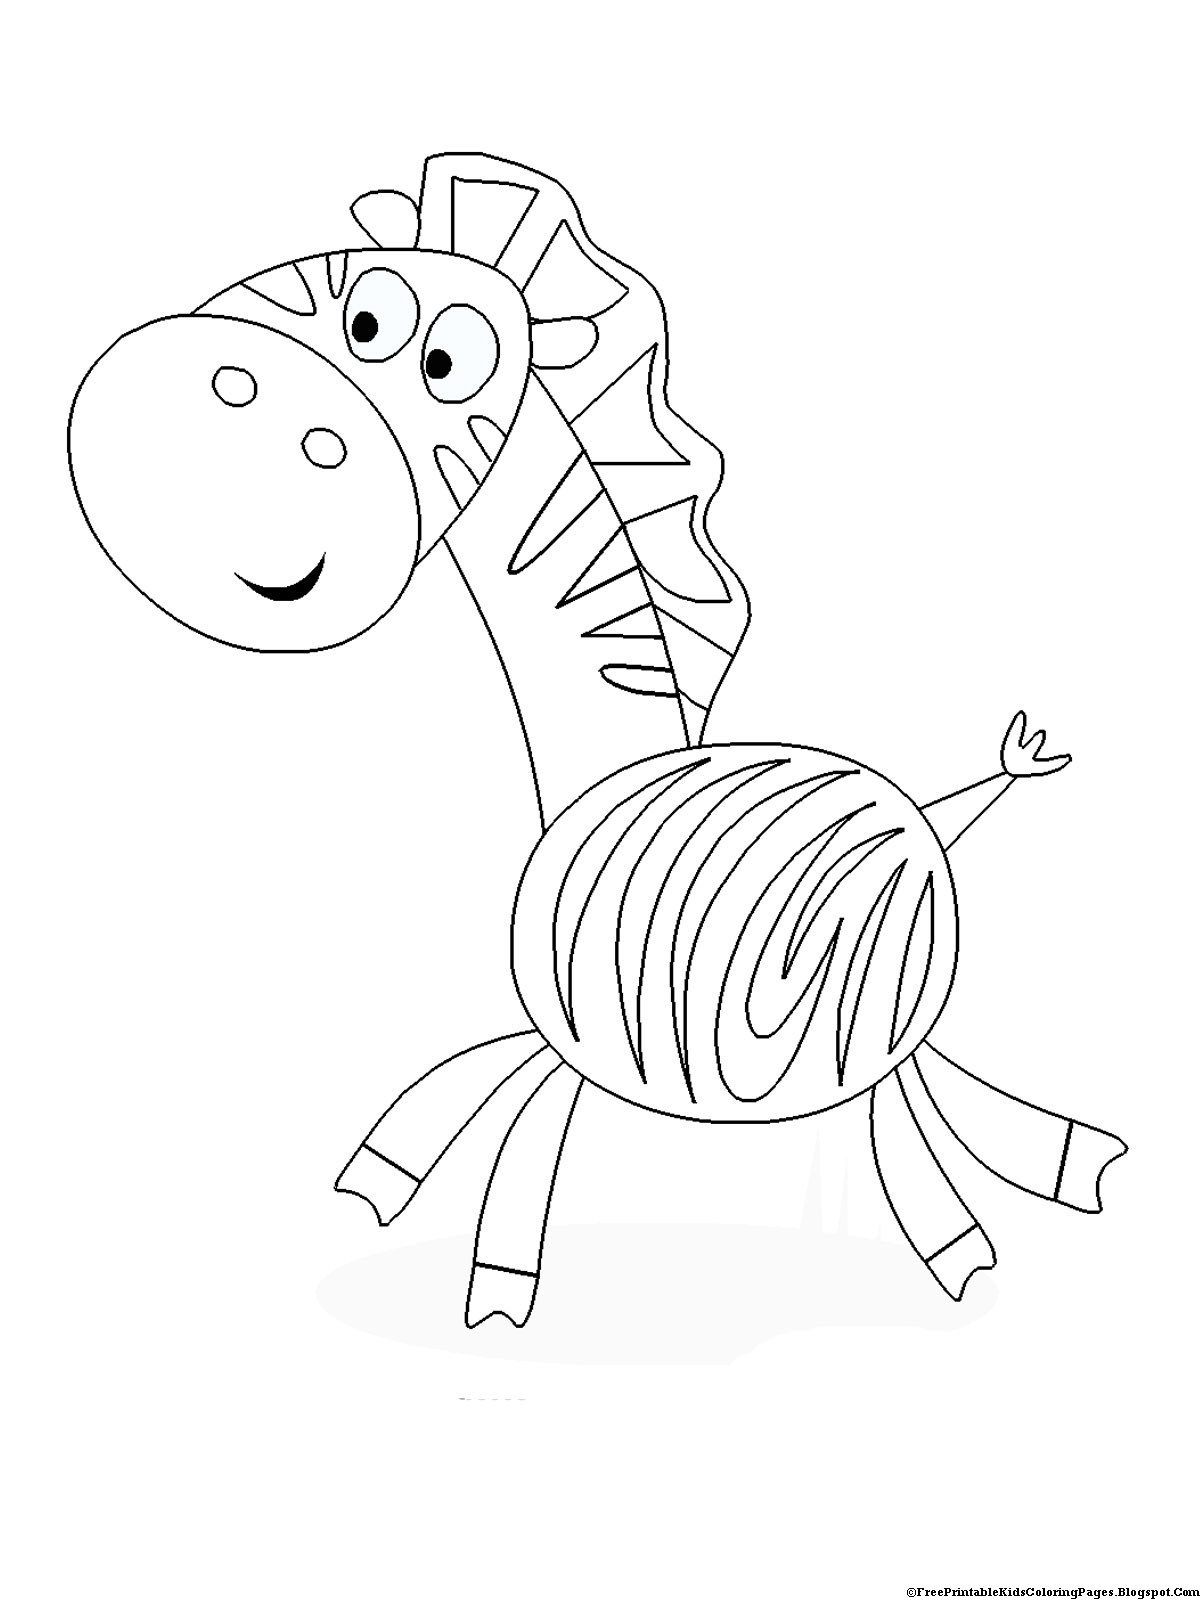 Coloring Books Printable
 Zebra Coloring Pages Free Printable Kids Coloring Pages